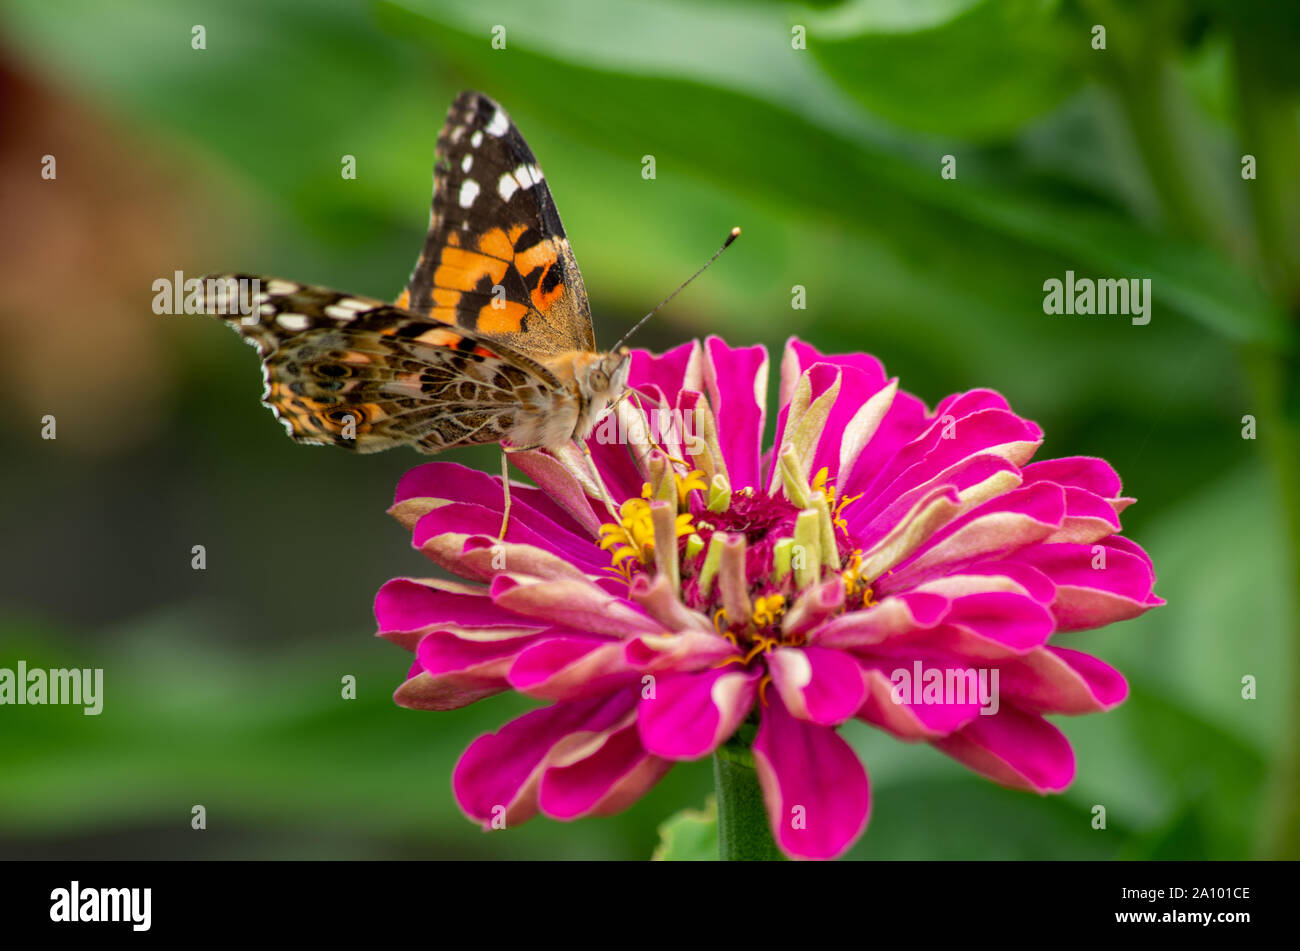 Painted Lady butterfly on Zinnia blossom Stock Photo